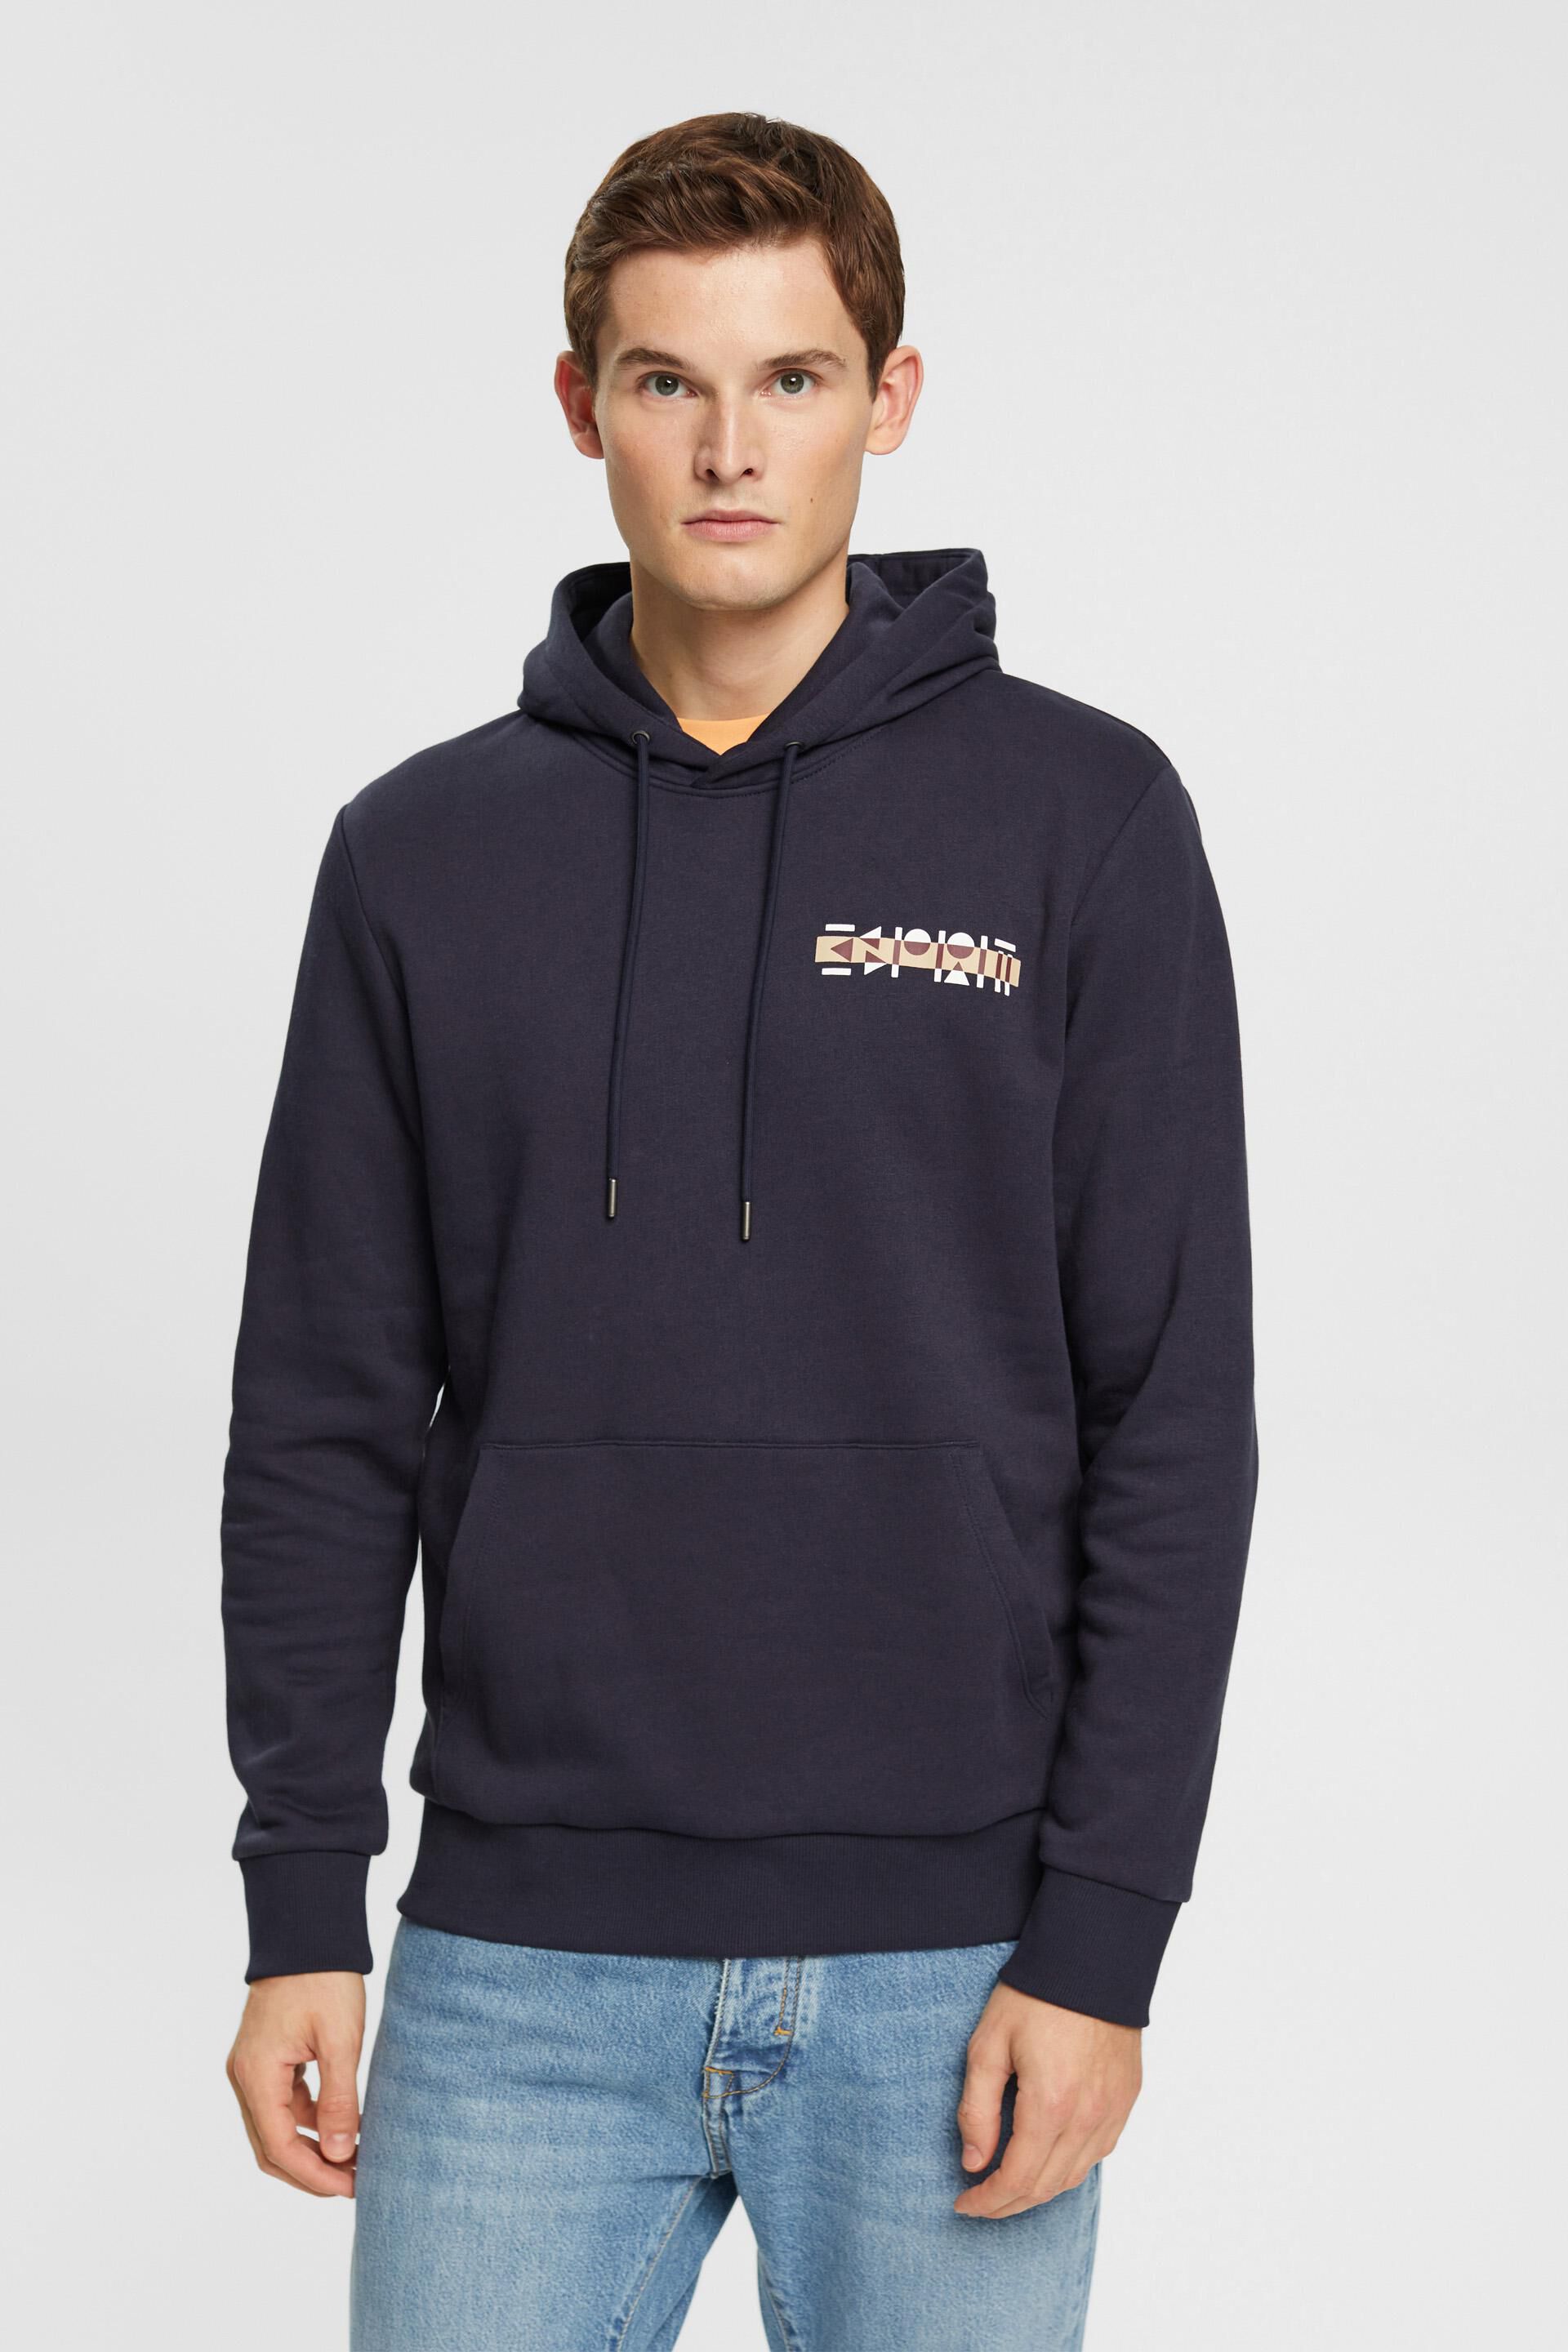 Esprit small logo with print Hoodie